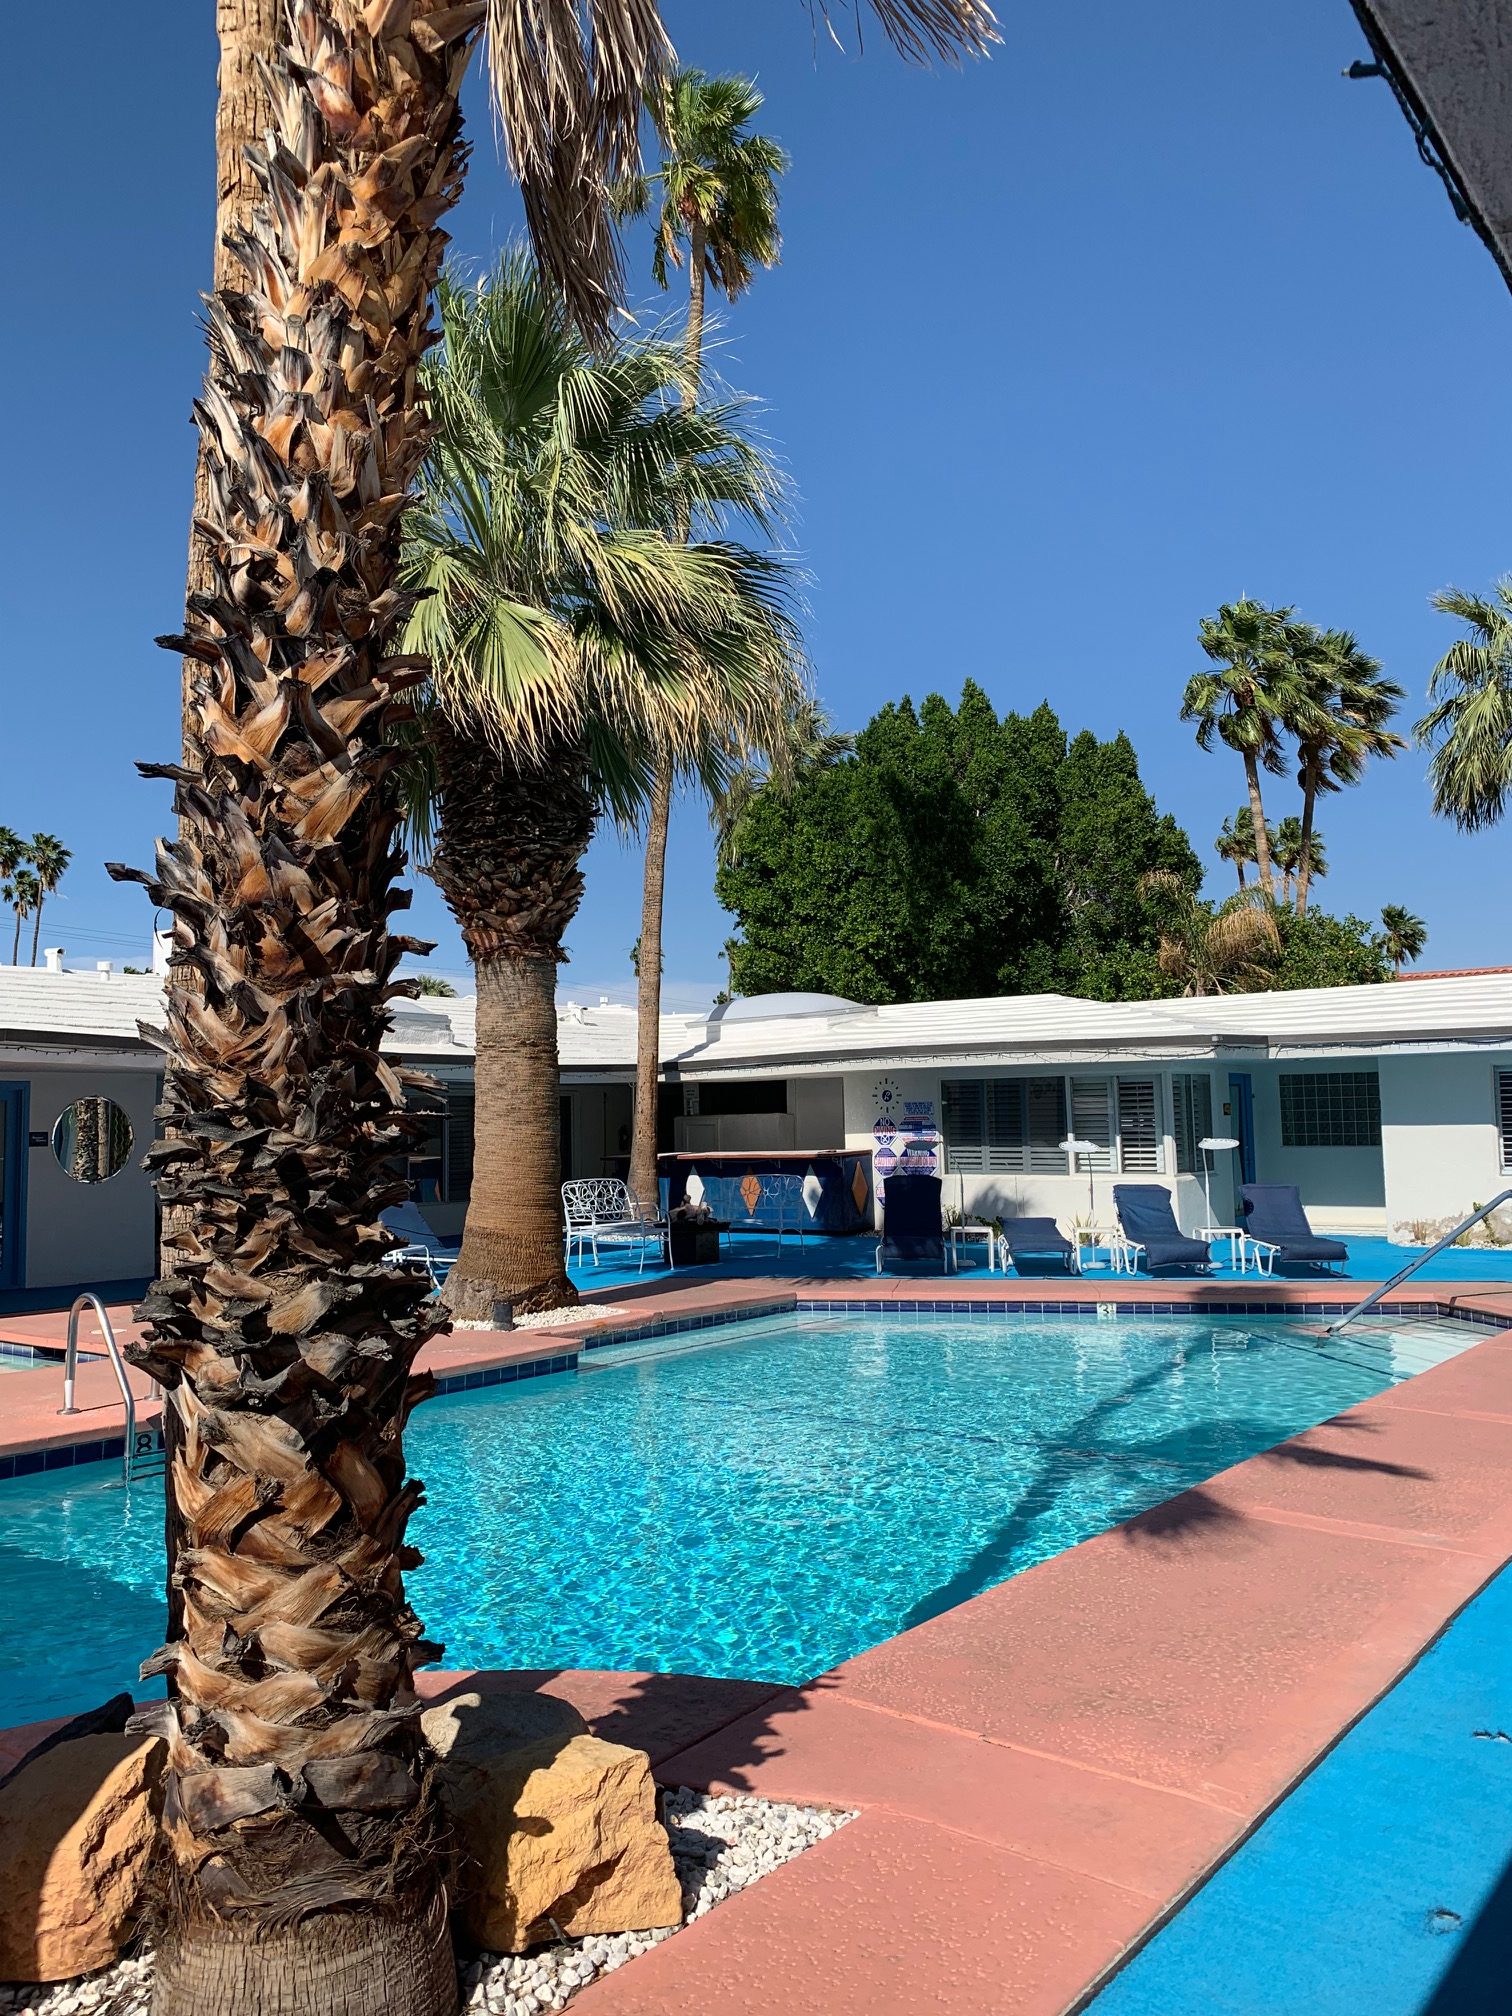 Revitalized Palm Springs Attracts Multi-Generational Visitors